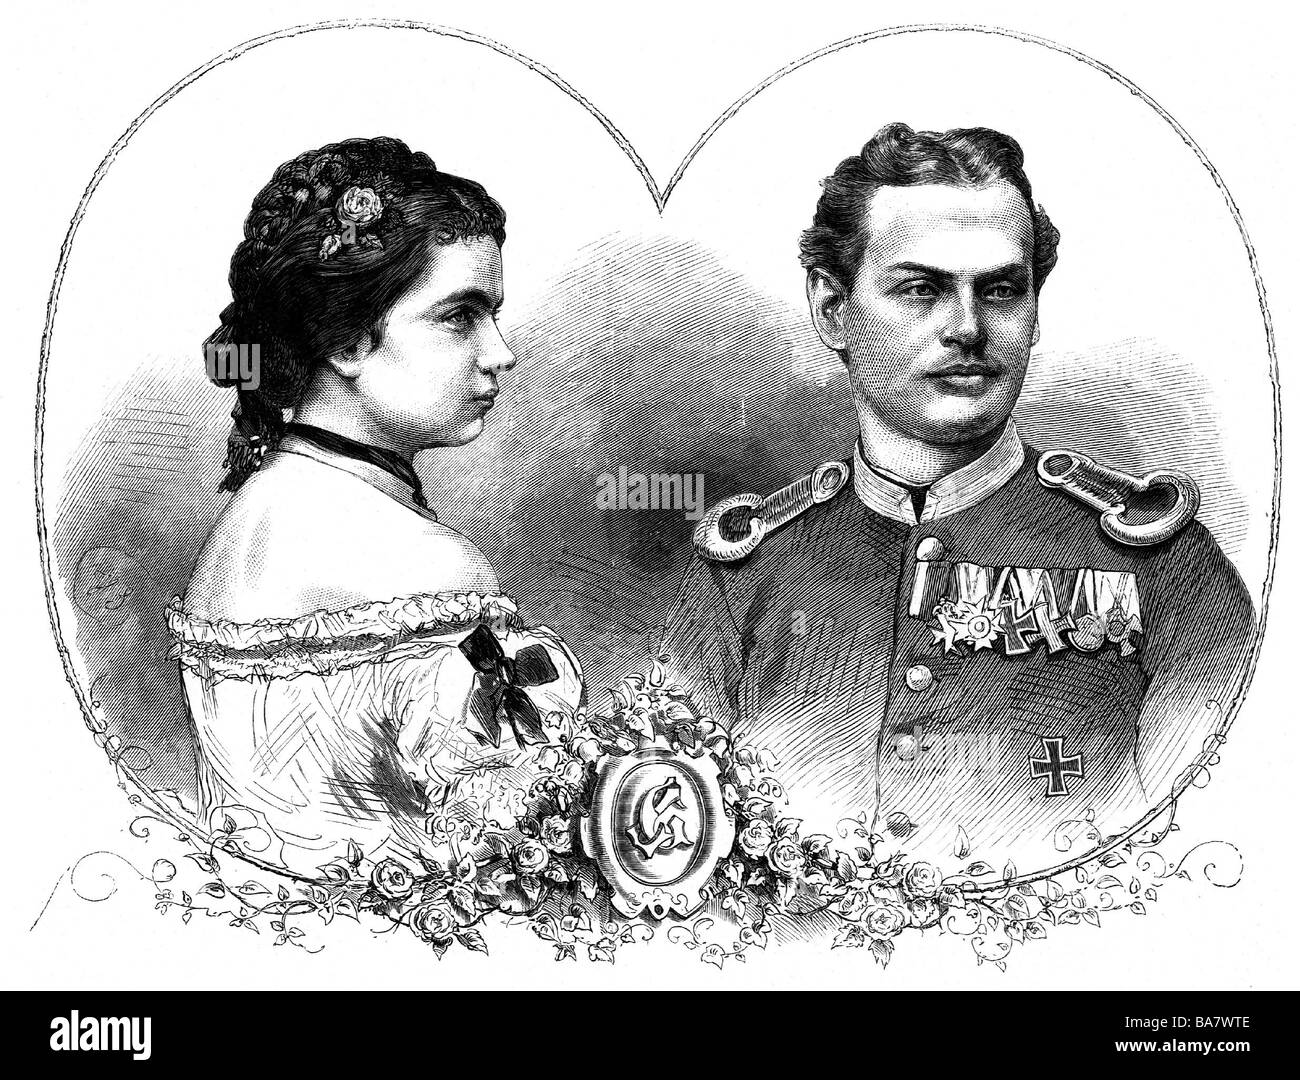 Leopold, 9.2. 1846 - 28.9.1930, Prince of Bavaria, with wife Gisela of Austria-Hungary (12.7.1856 - 27.7.1932), portrait, wood engraving, publishe on occation of their marriage, 20.4.1873, , Stock Photo